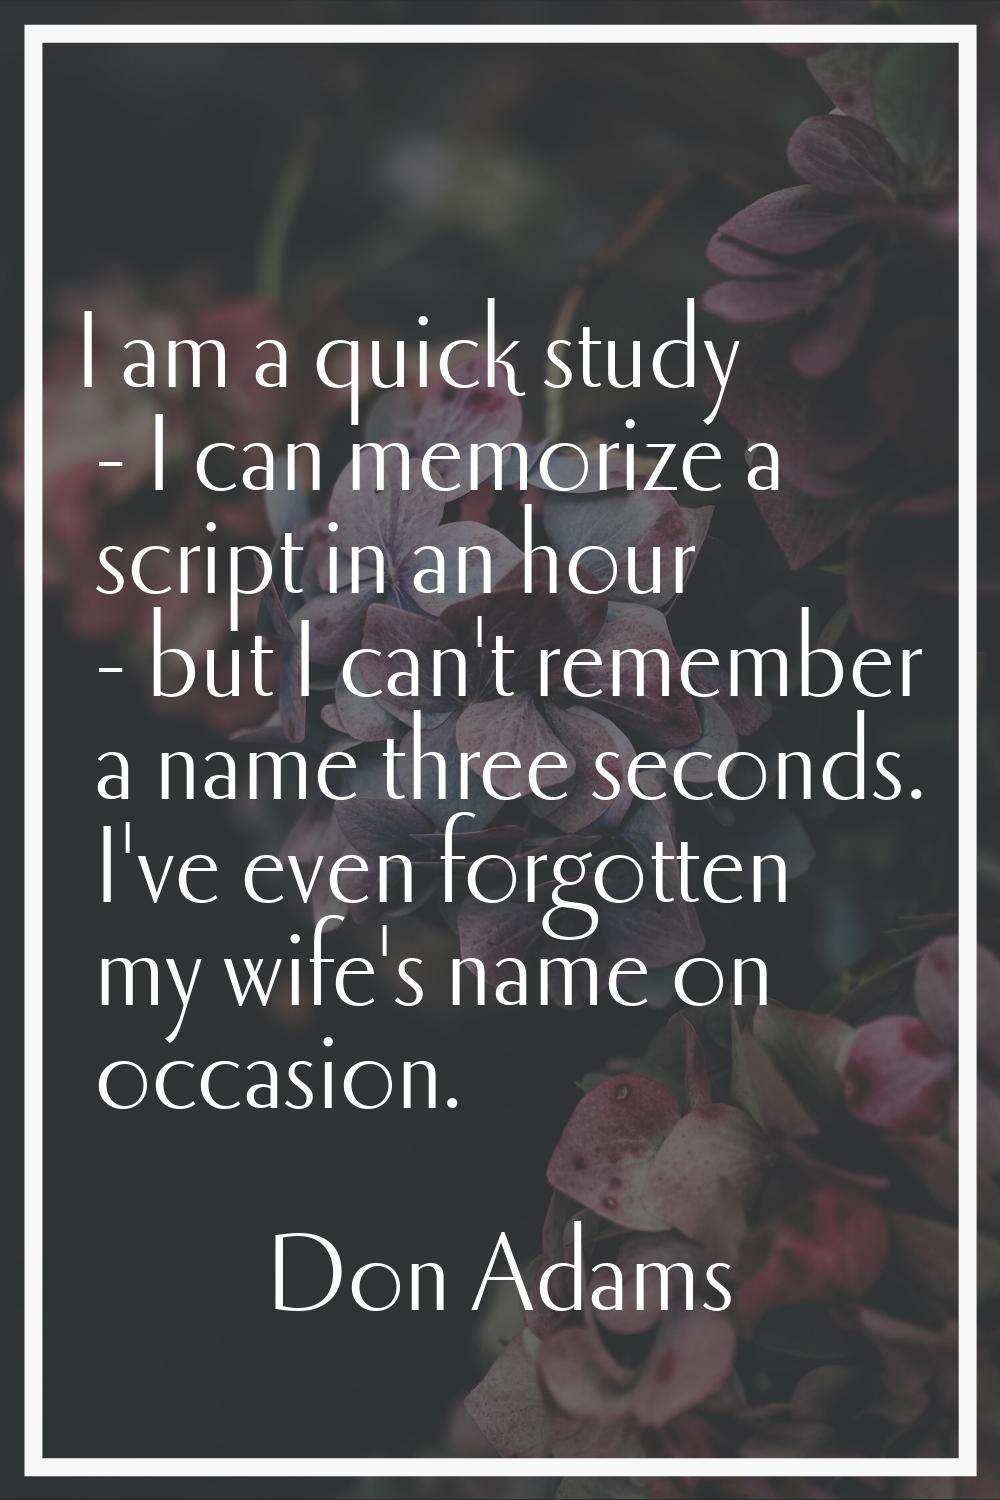 I am a quick study - I can memorize a script in an hour - but I can't remember a name three seconds